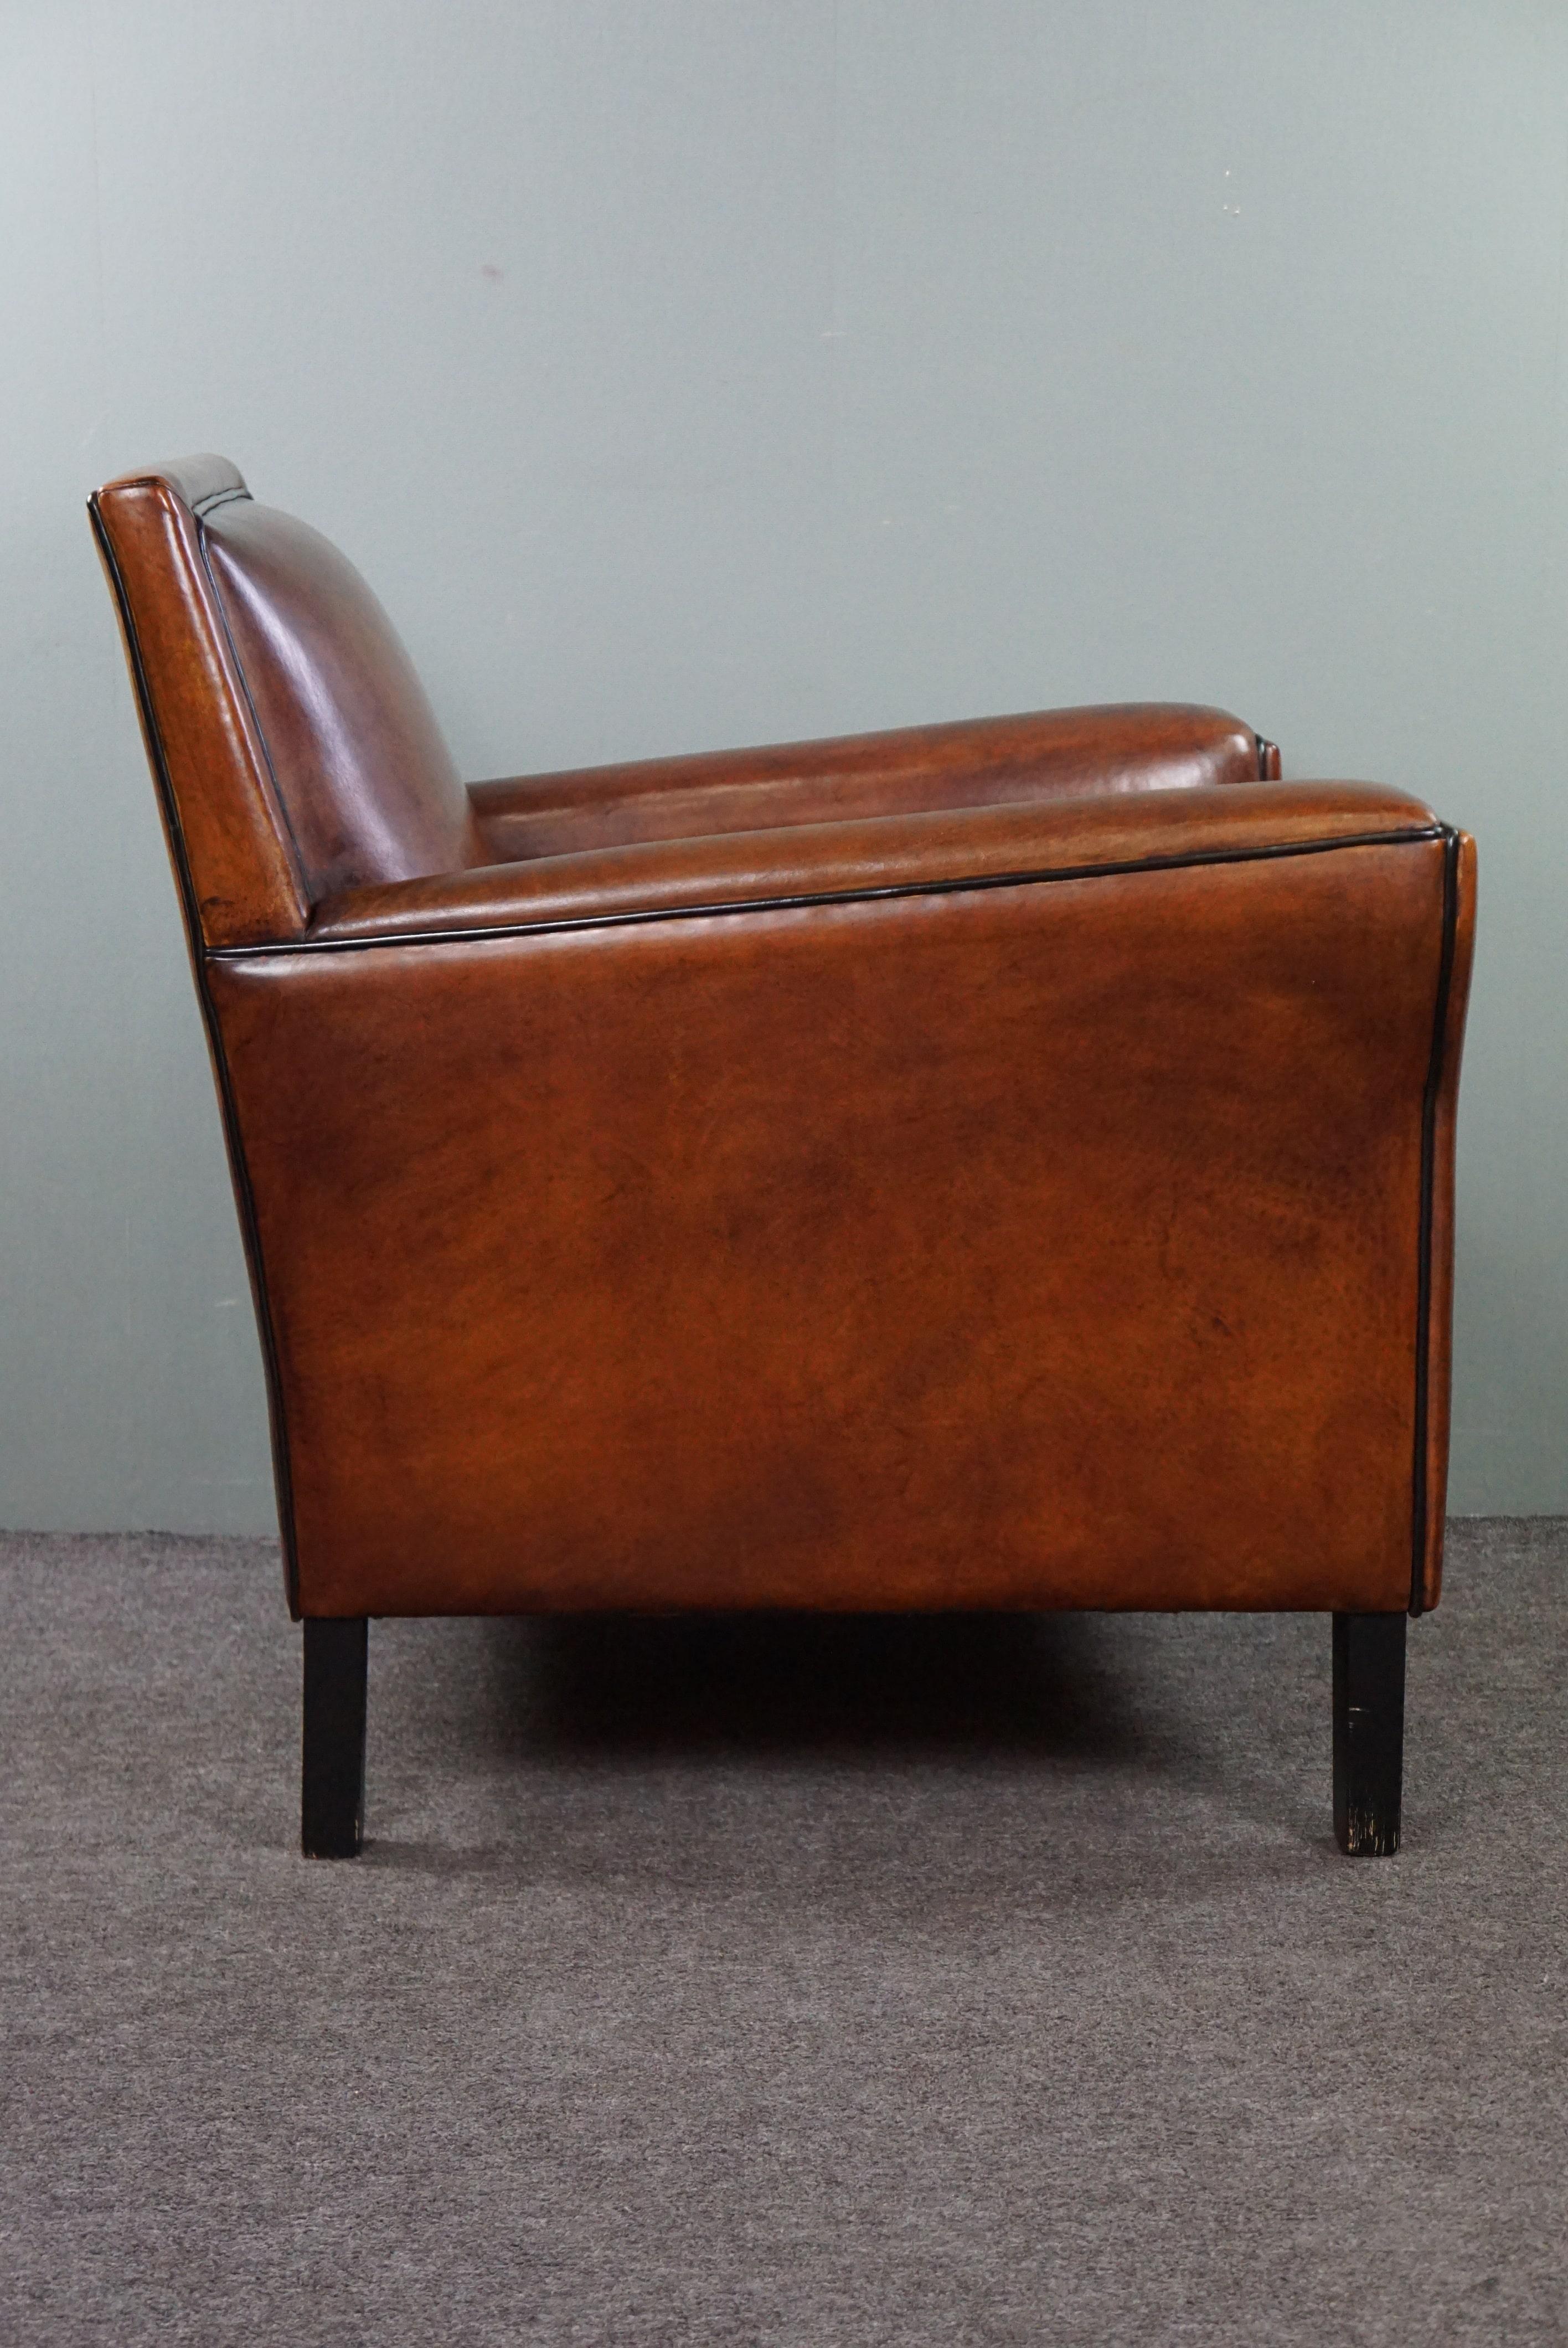 Offered is this high-quality sheep leather armchair with a beautiful hint of Art Deco style. Form, function, comfort, style, and durability – where does one find furniture that bundles all these qualities and showcases them to you in such a